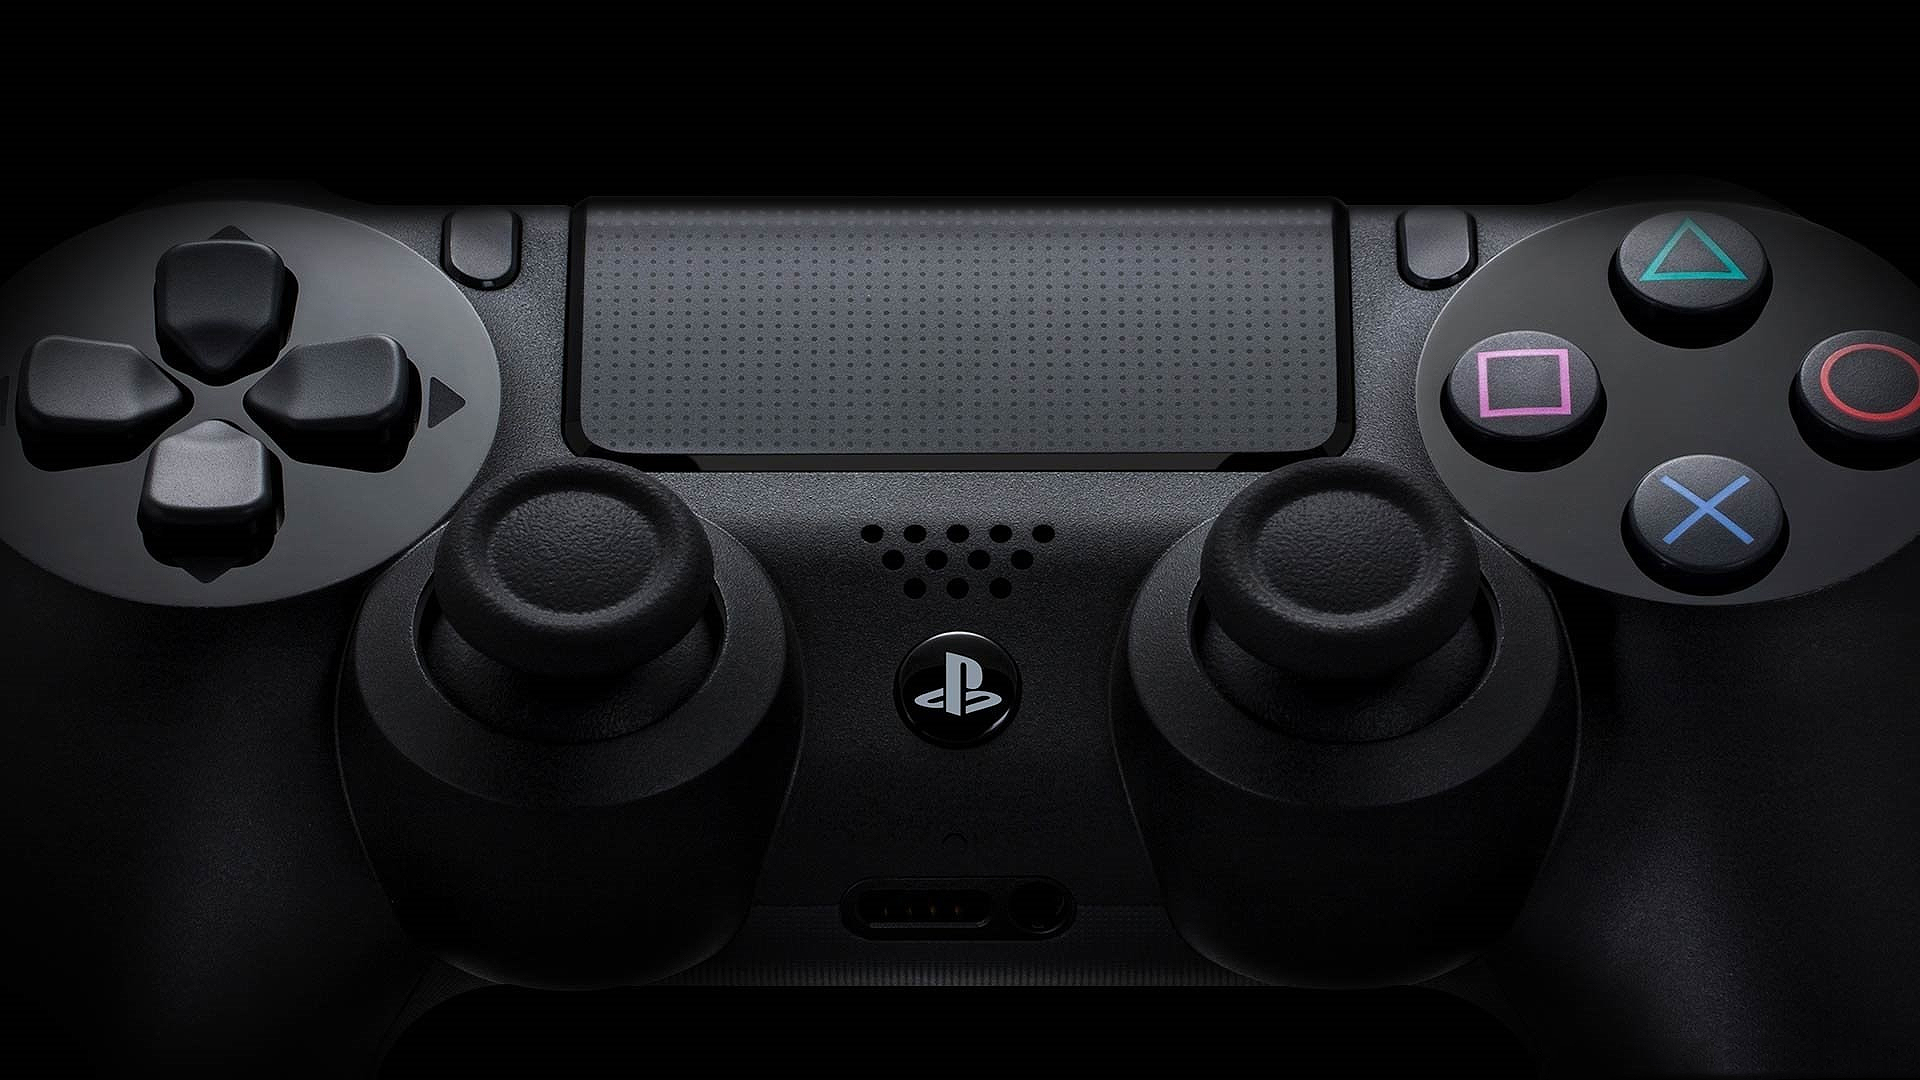 Sony Might Launch Two Models: PlayStation 5 And PlayStation 5 Pro